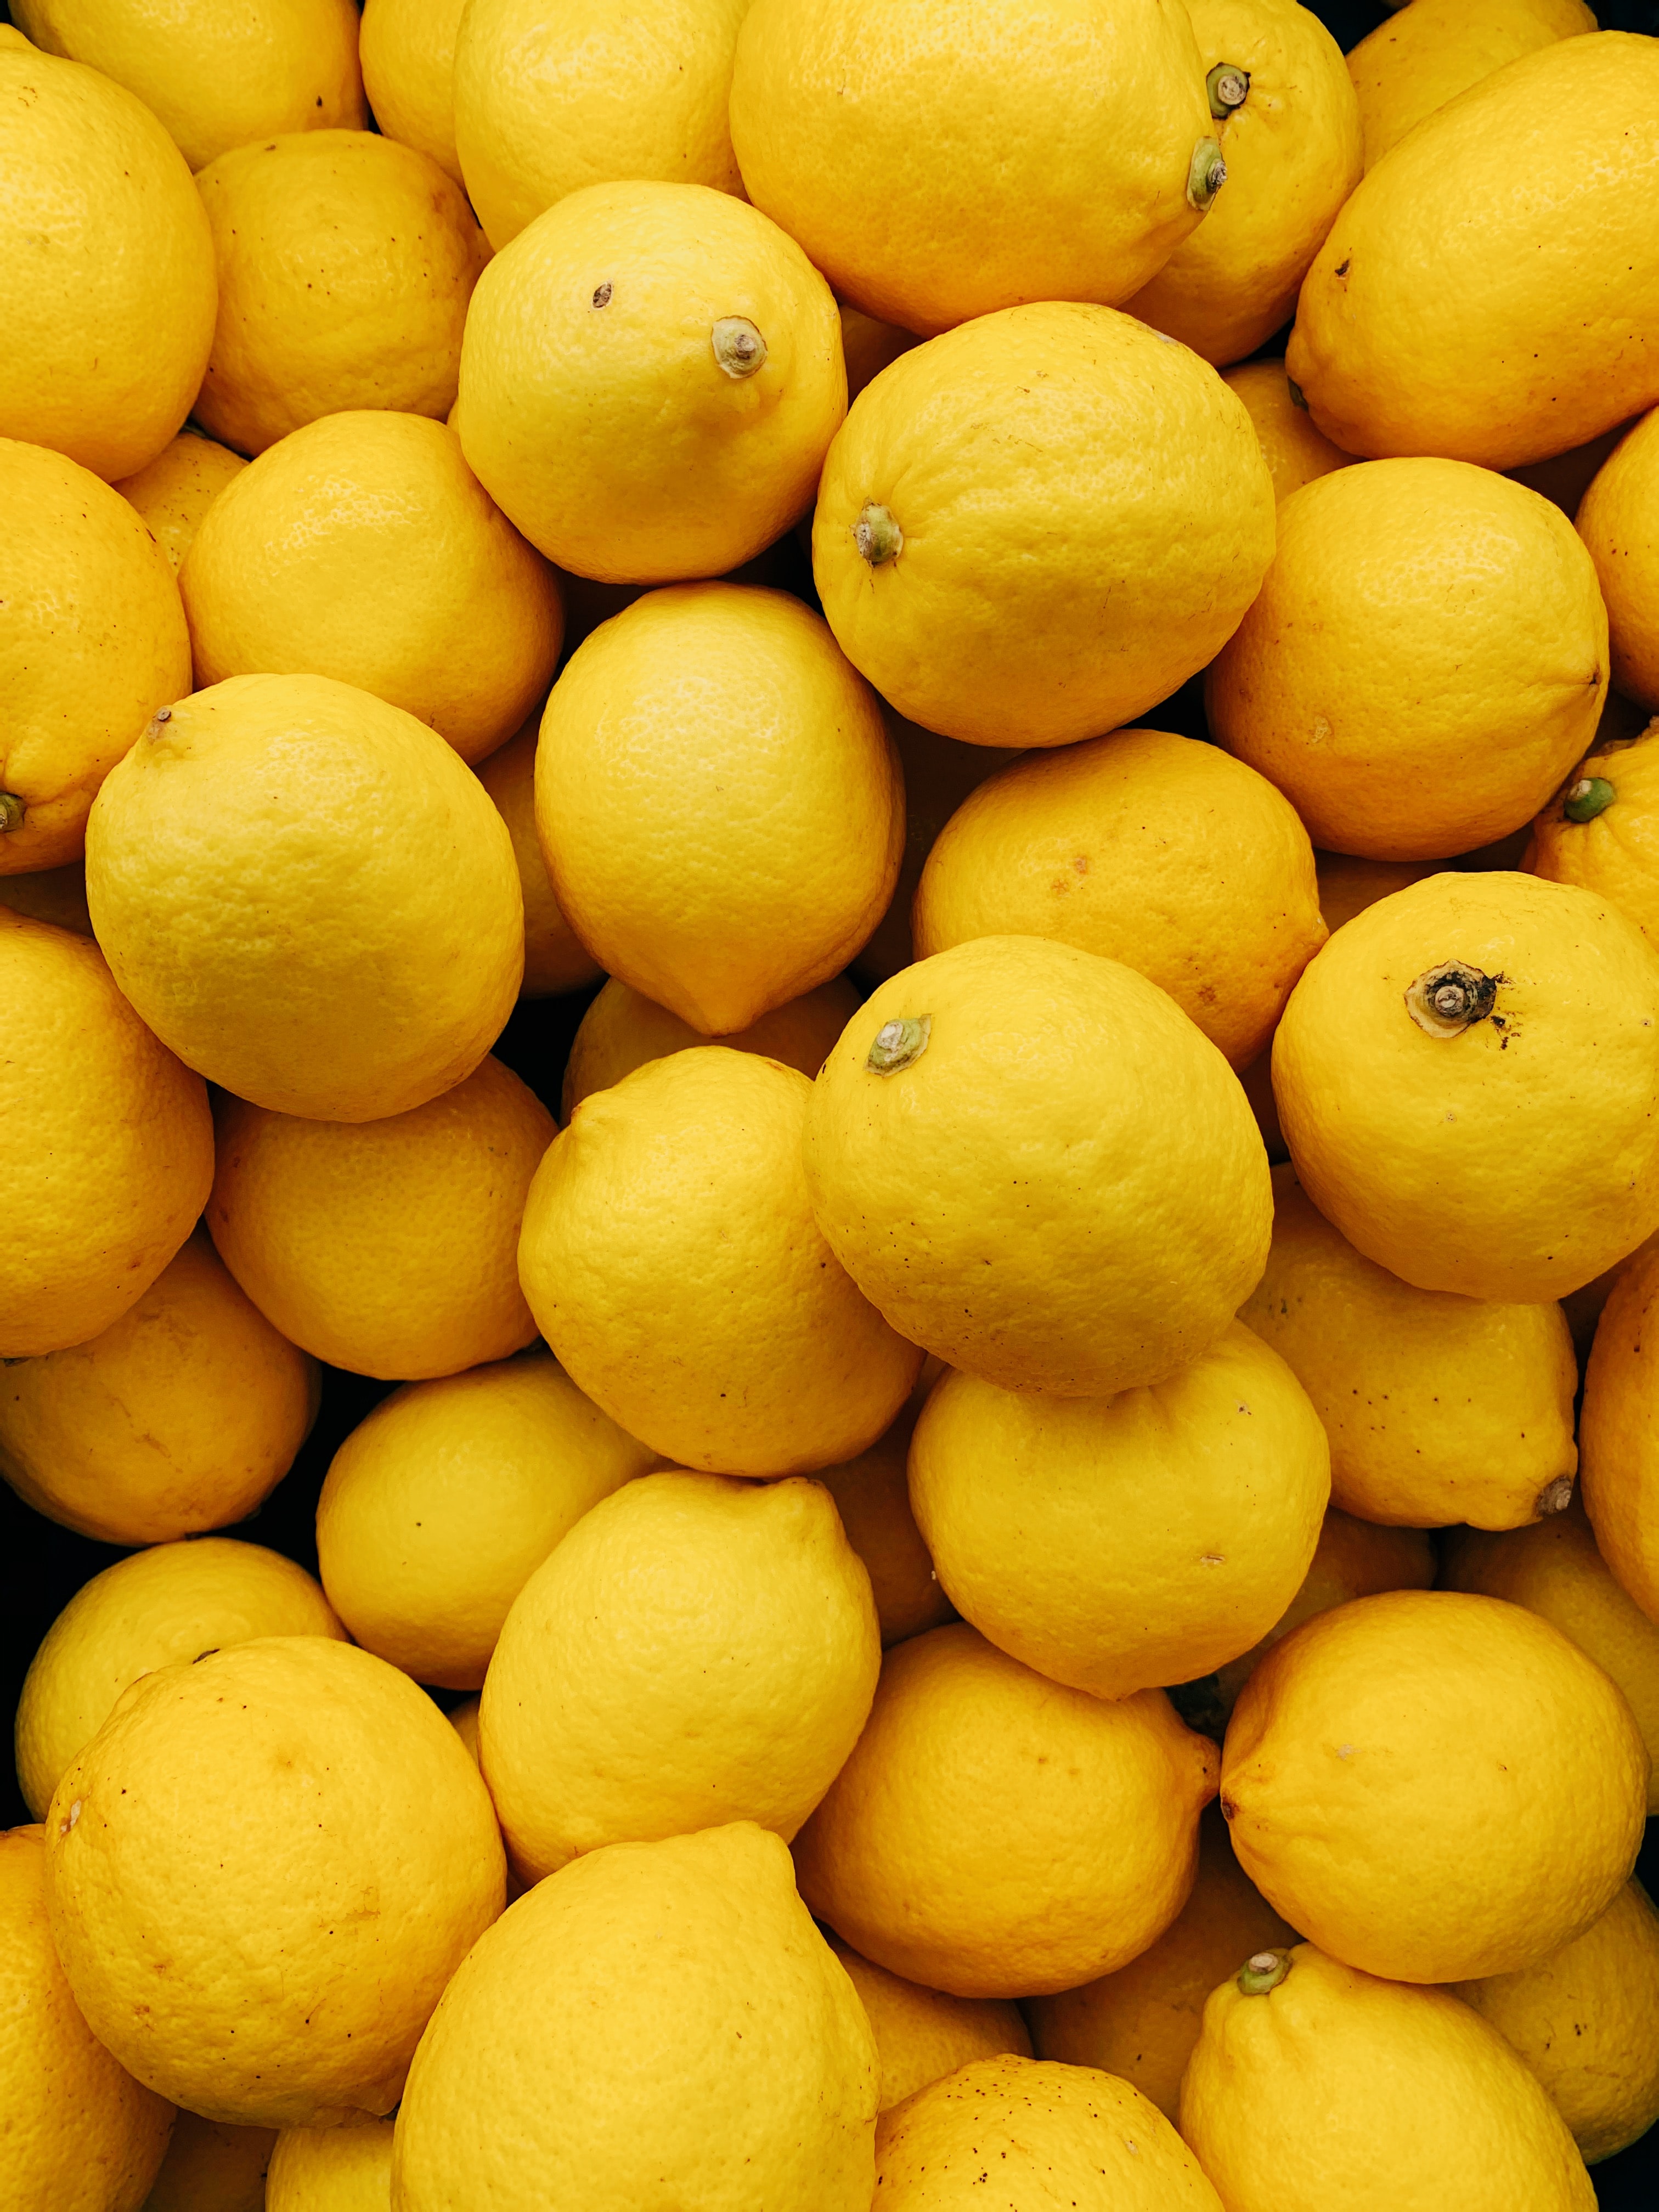 84878 Screensavers and Wallpapers Lemon for phone. Download fruits, food, yellow, lemon, citrus pictures for free